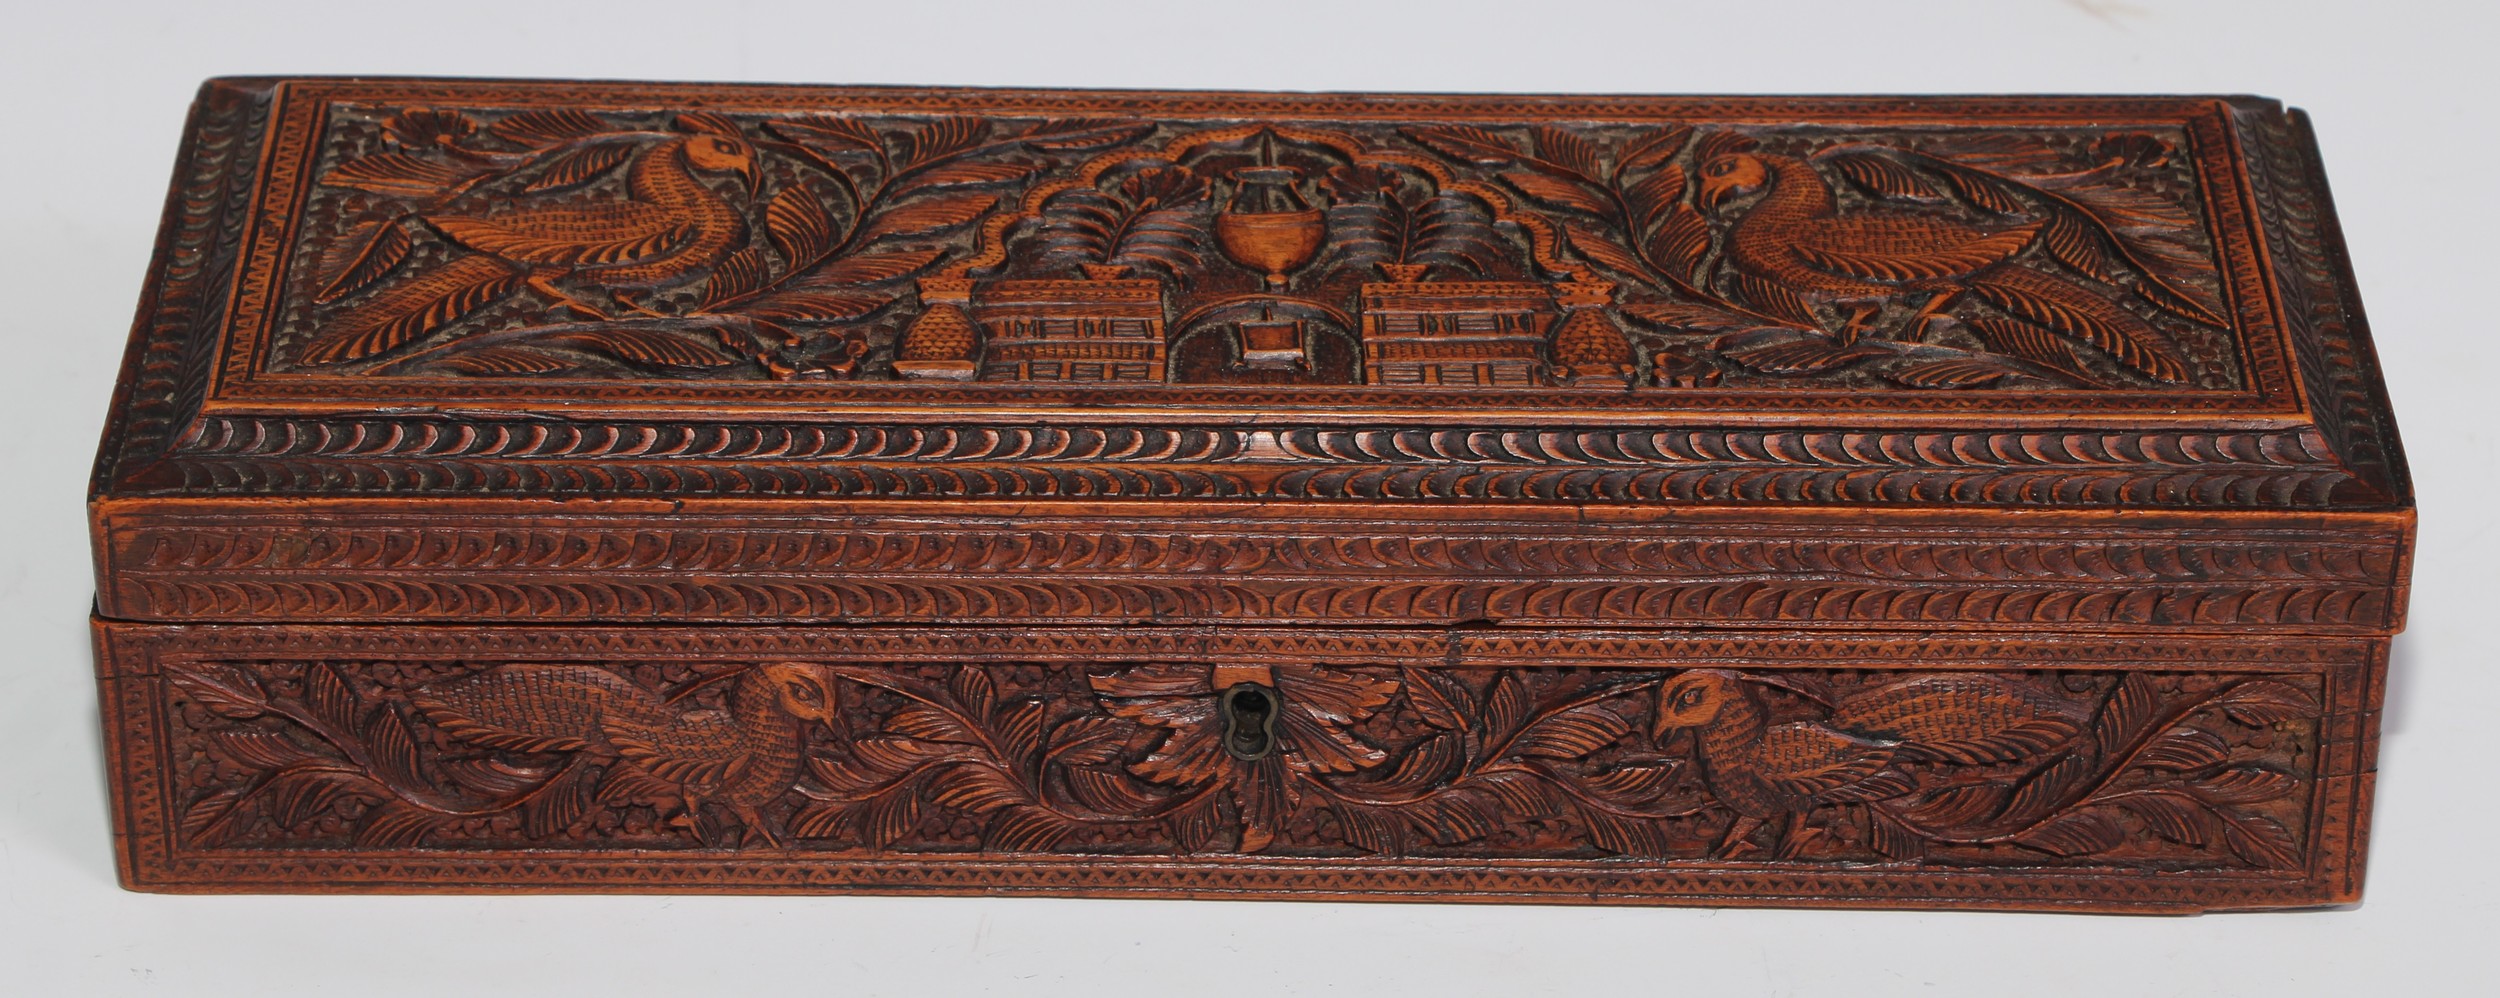 An Indian sandalwood rectangular box, hinged cover, carved in relief with peacocks, architecture,